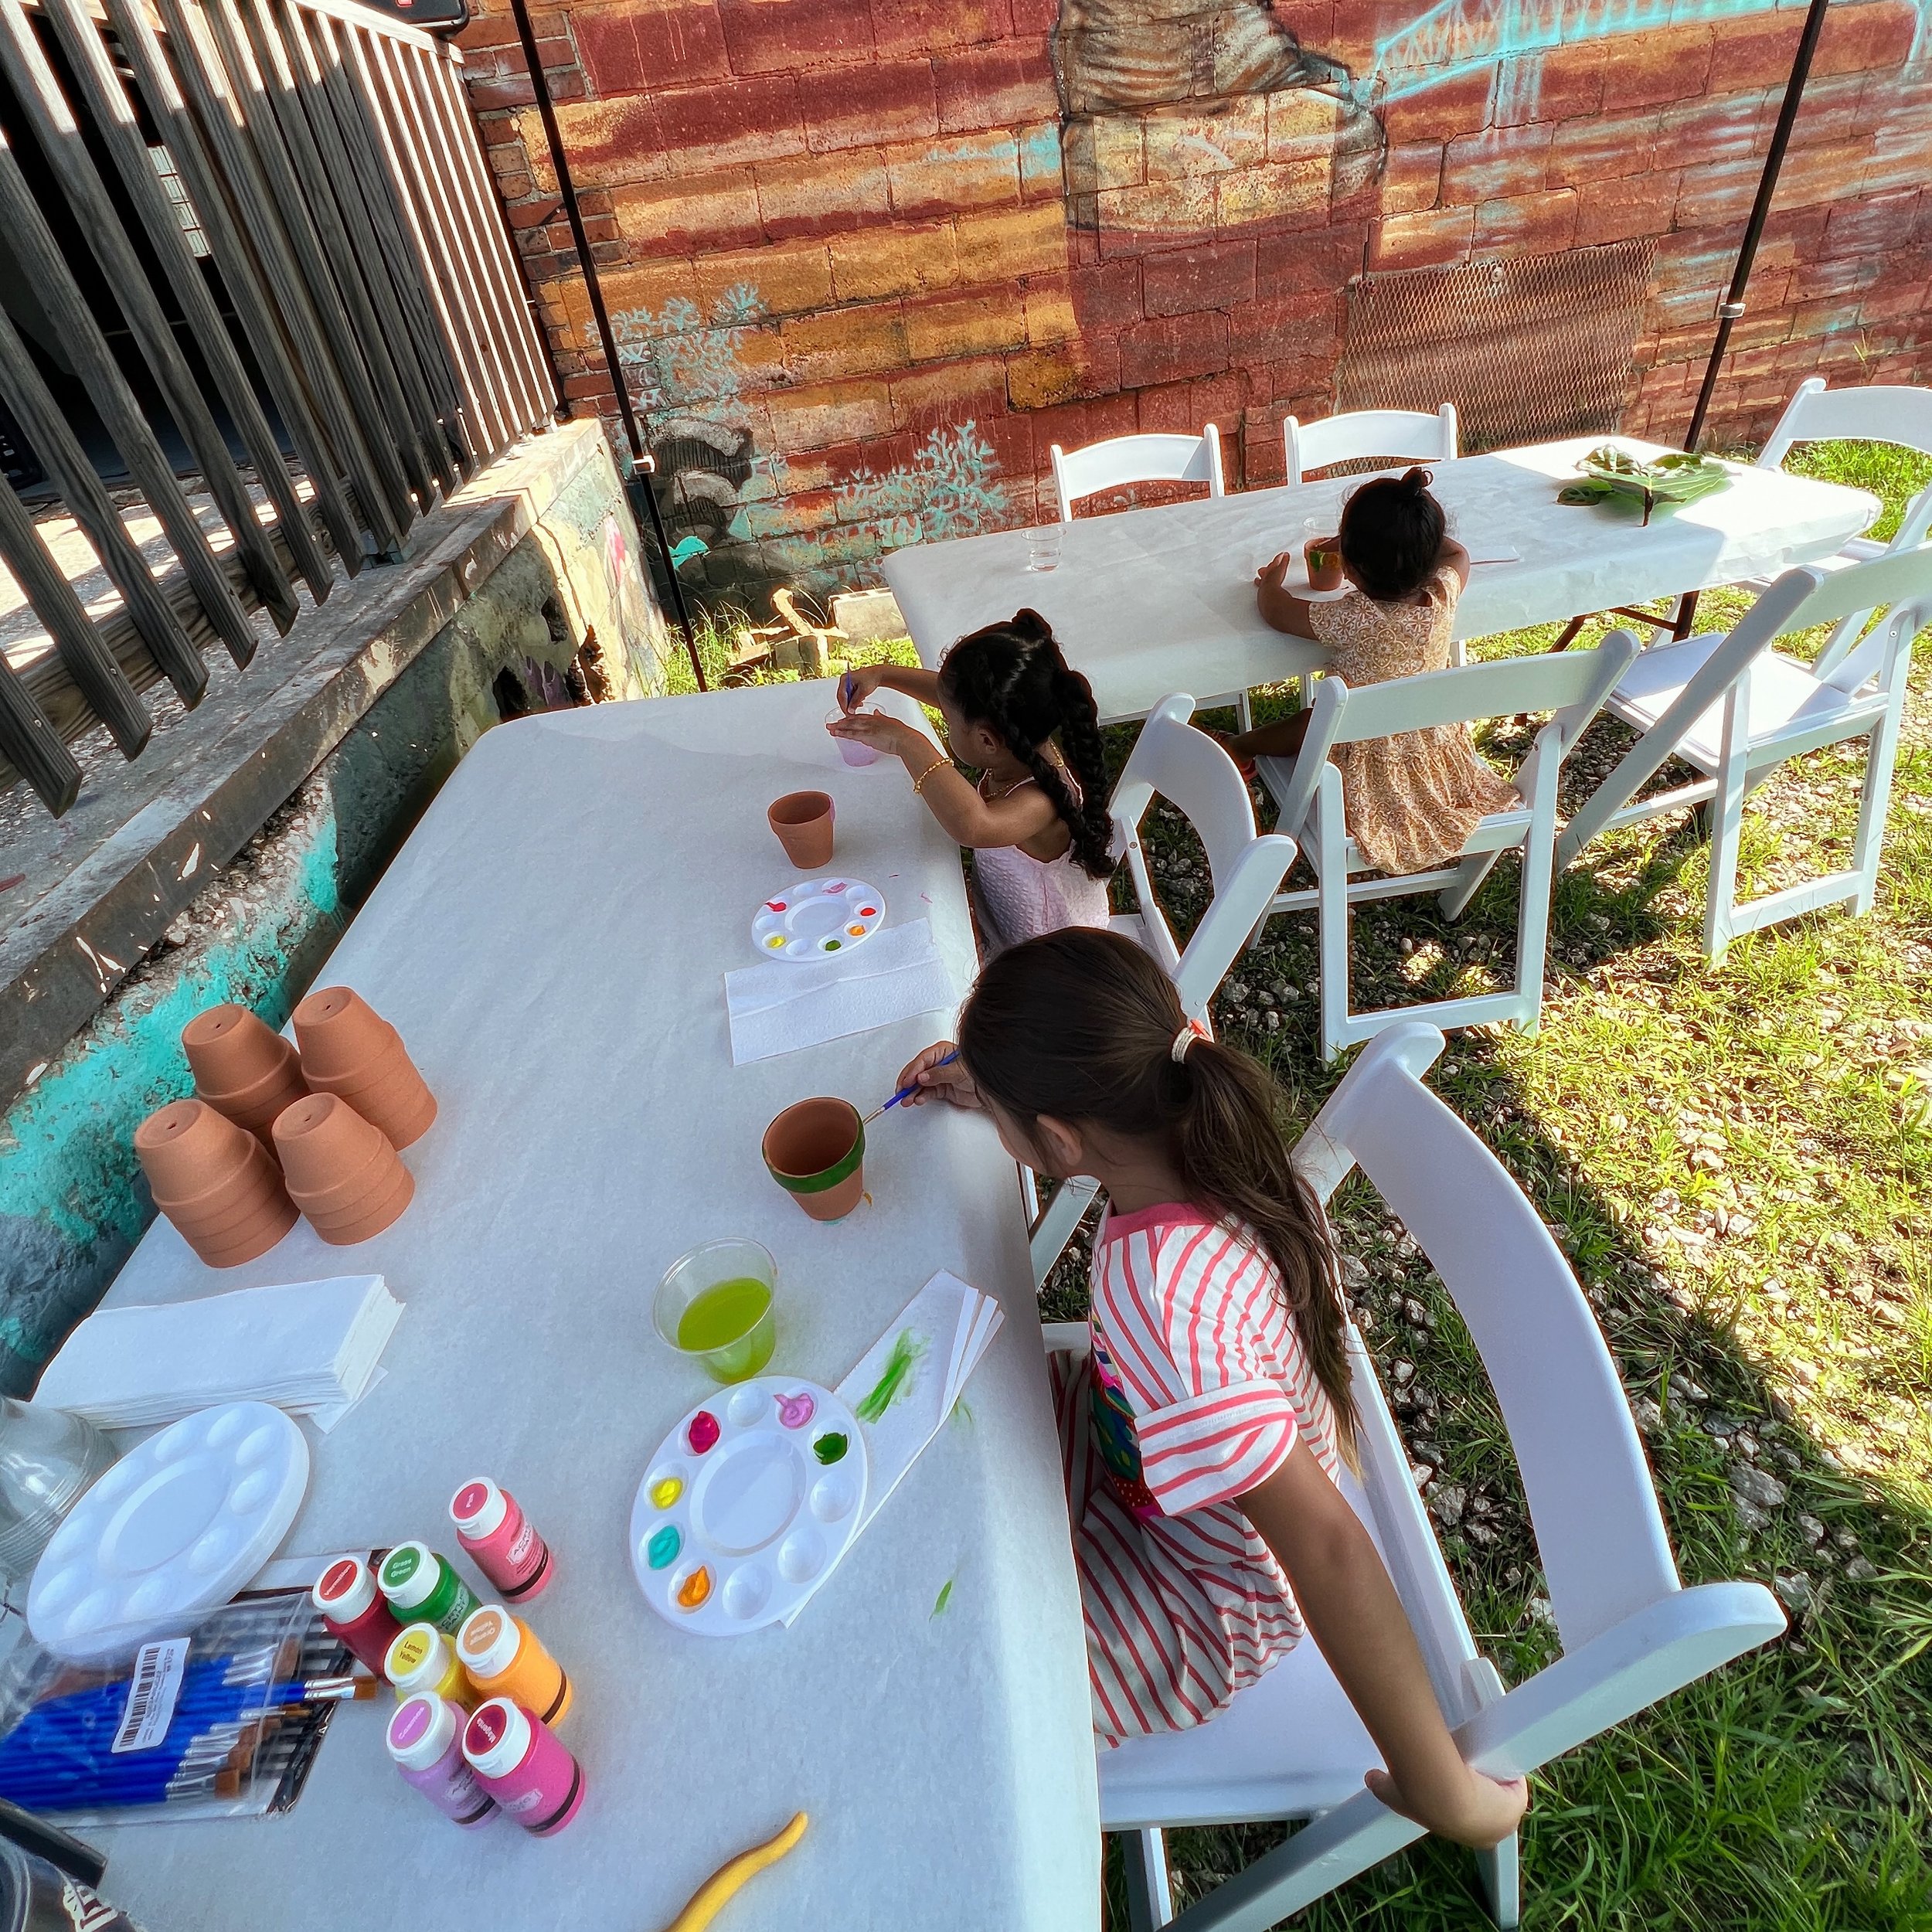 Bring your kiddos by the PHX Mini Pot Painting activity table at the Spring Artist &amp; Makers Market this Saturday, May 11 from 11am to 4pm. We&rsquo;ll be in the Legacy Building located at 2404 Hubbard St. 32206.